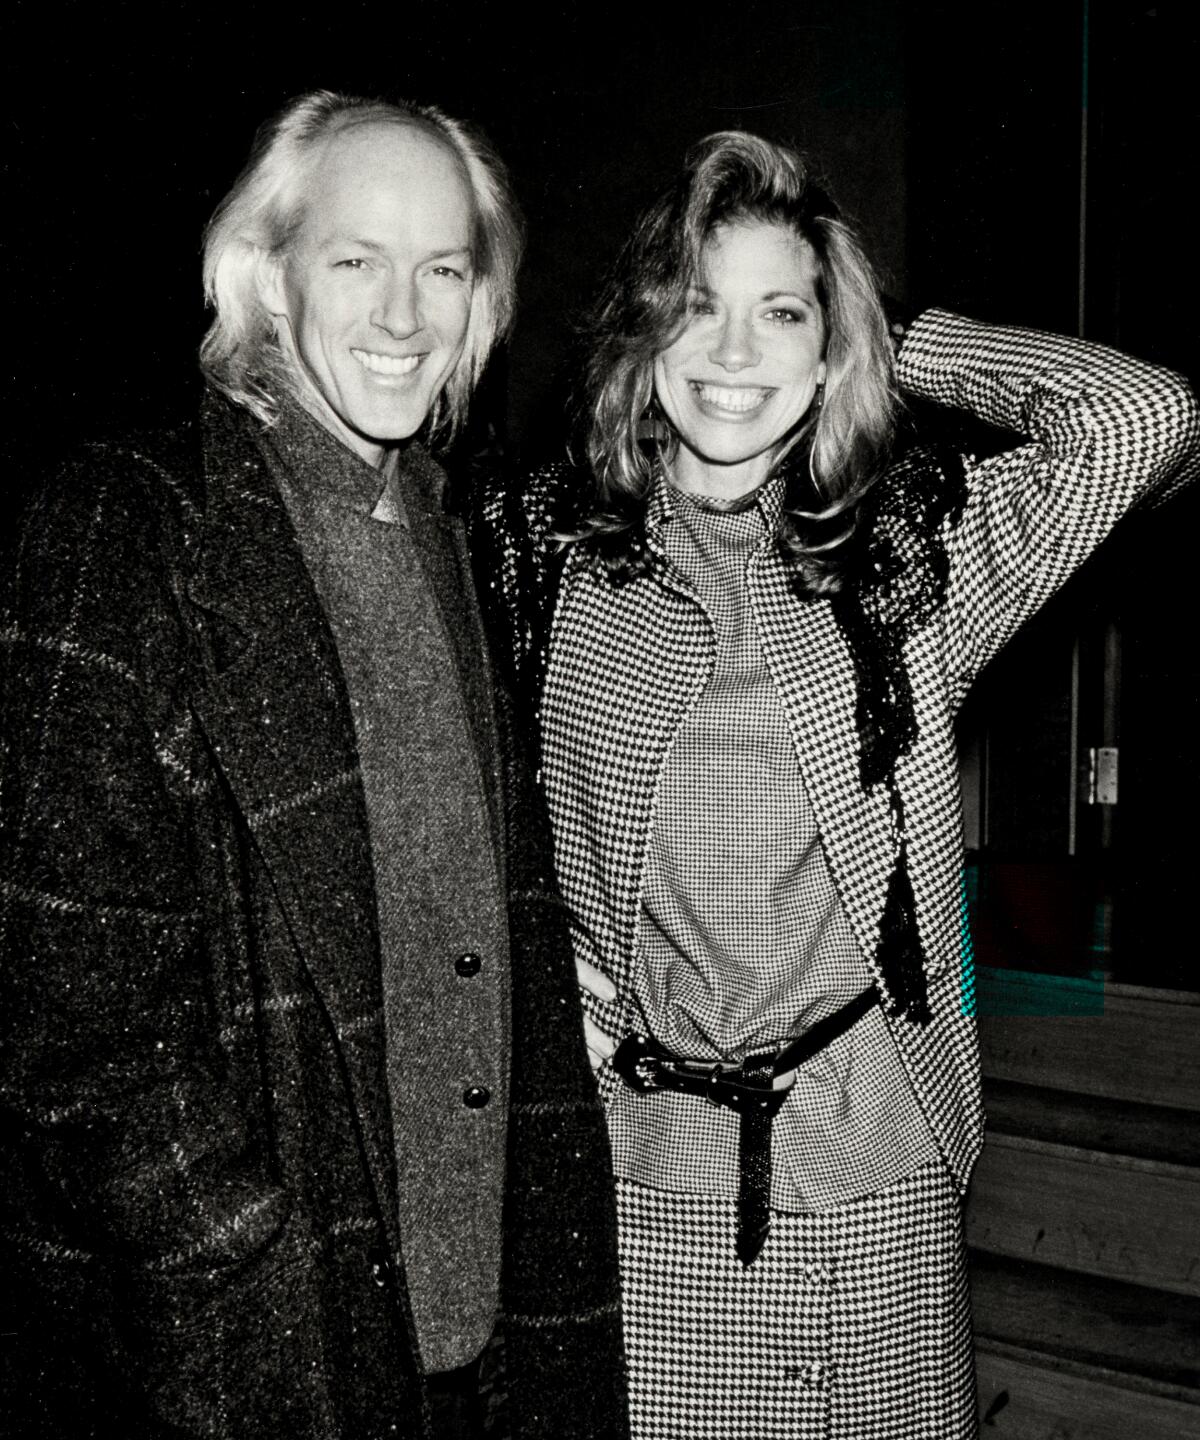 Russ Kunkel and Carly Simon in 1985.